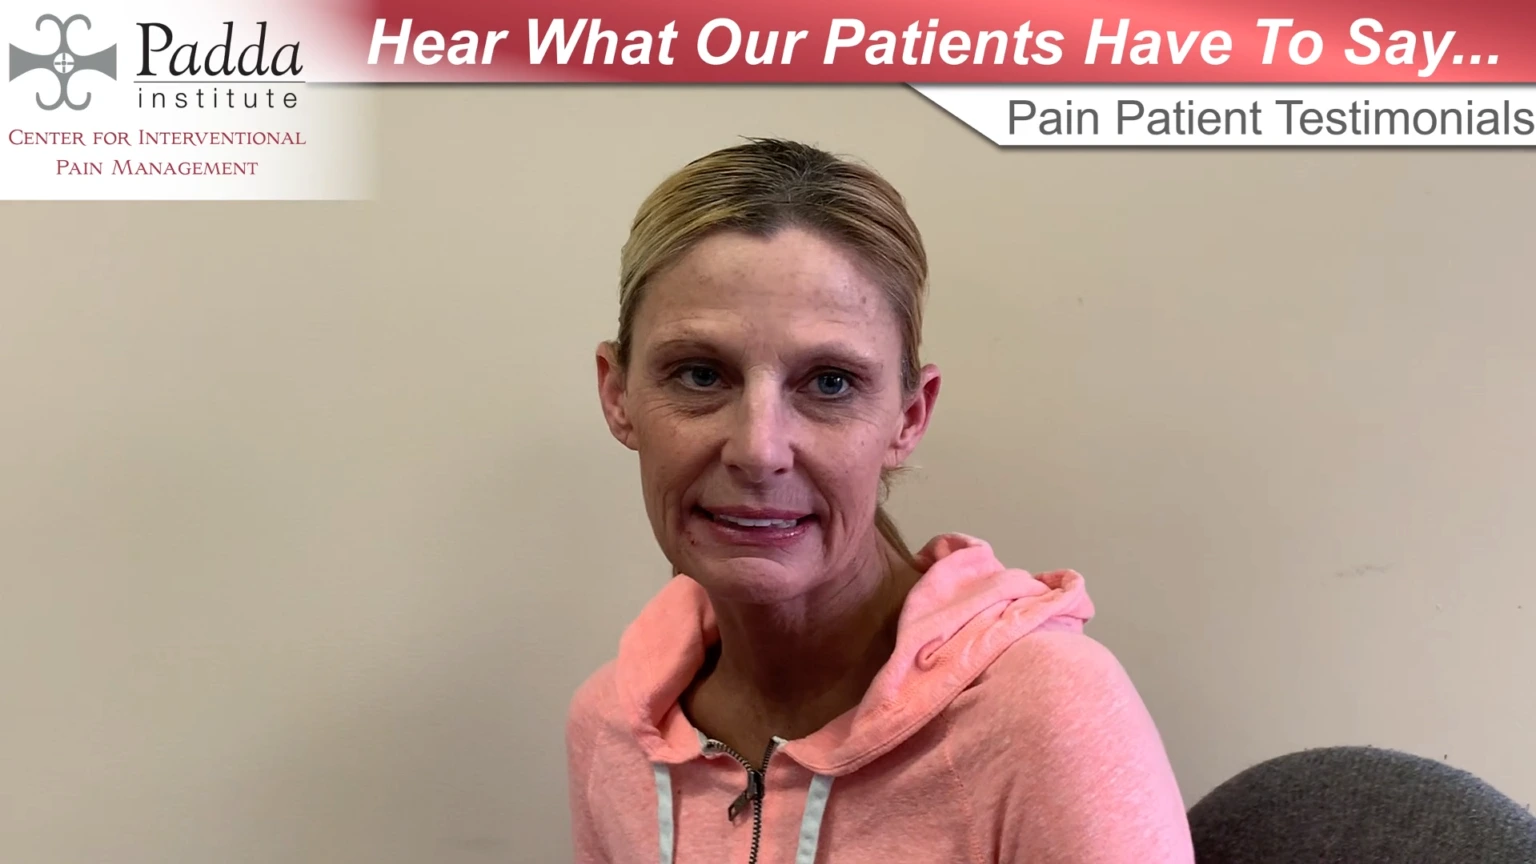 Chronic Pain Relief Testimonial by Our Patient - Padda Institute